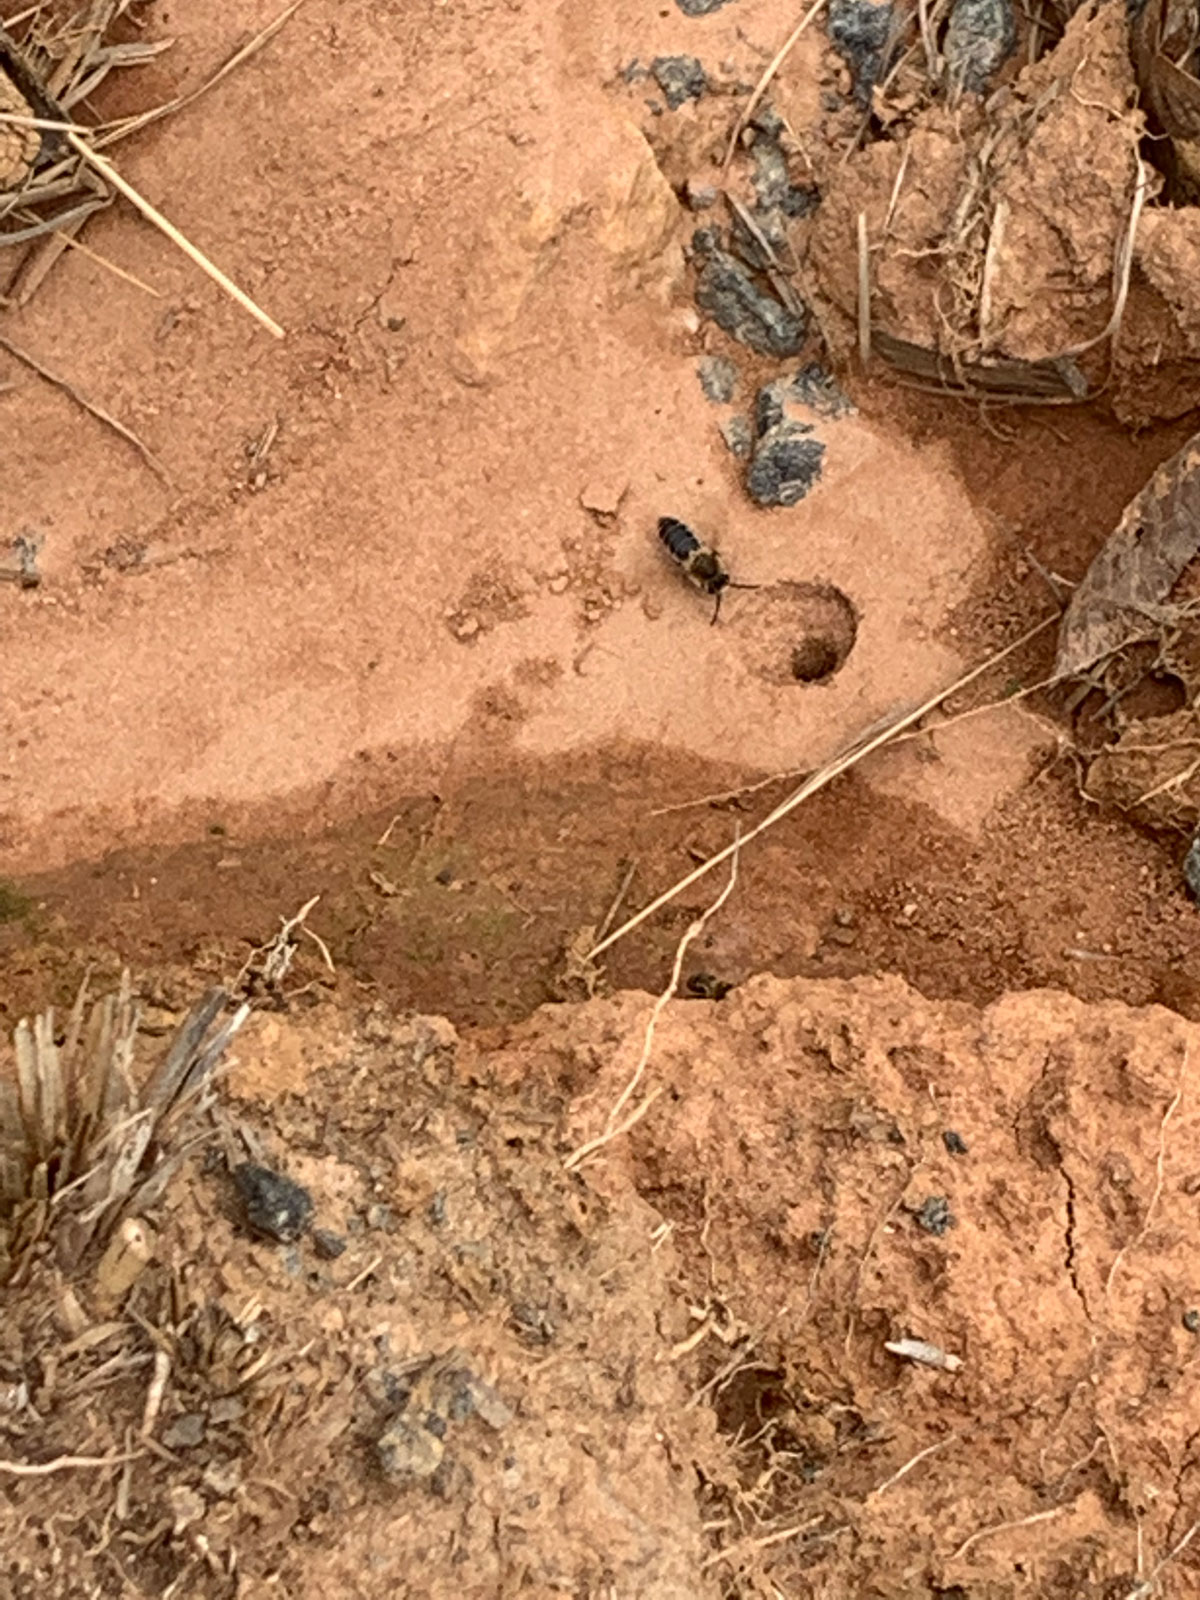 Small black bee on dry dirt with hole